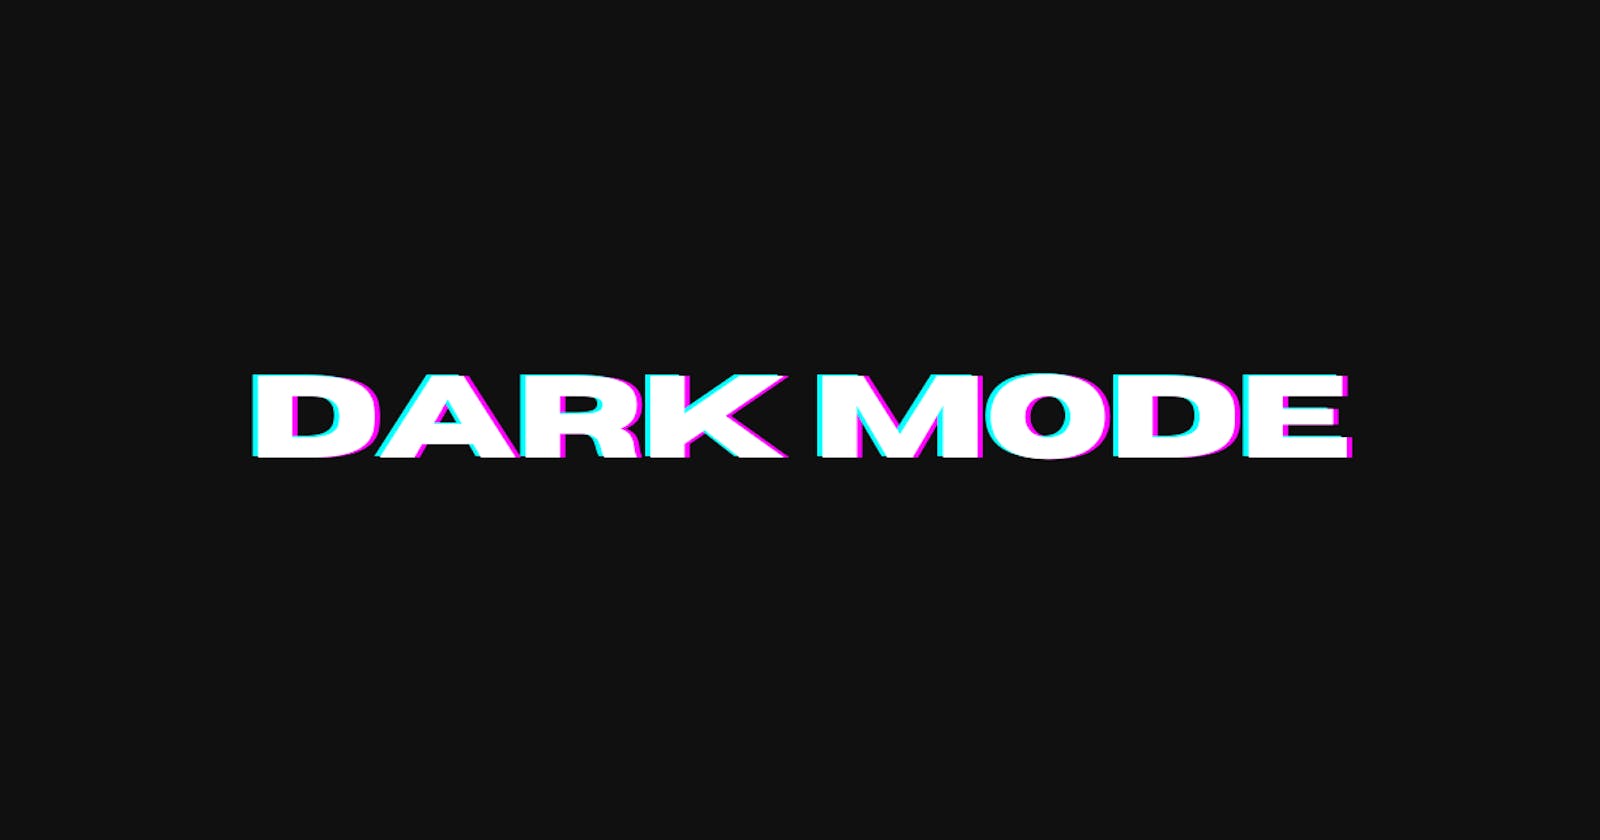 How to easily Implement Dark Mode on ANY Website